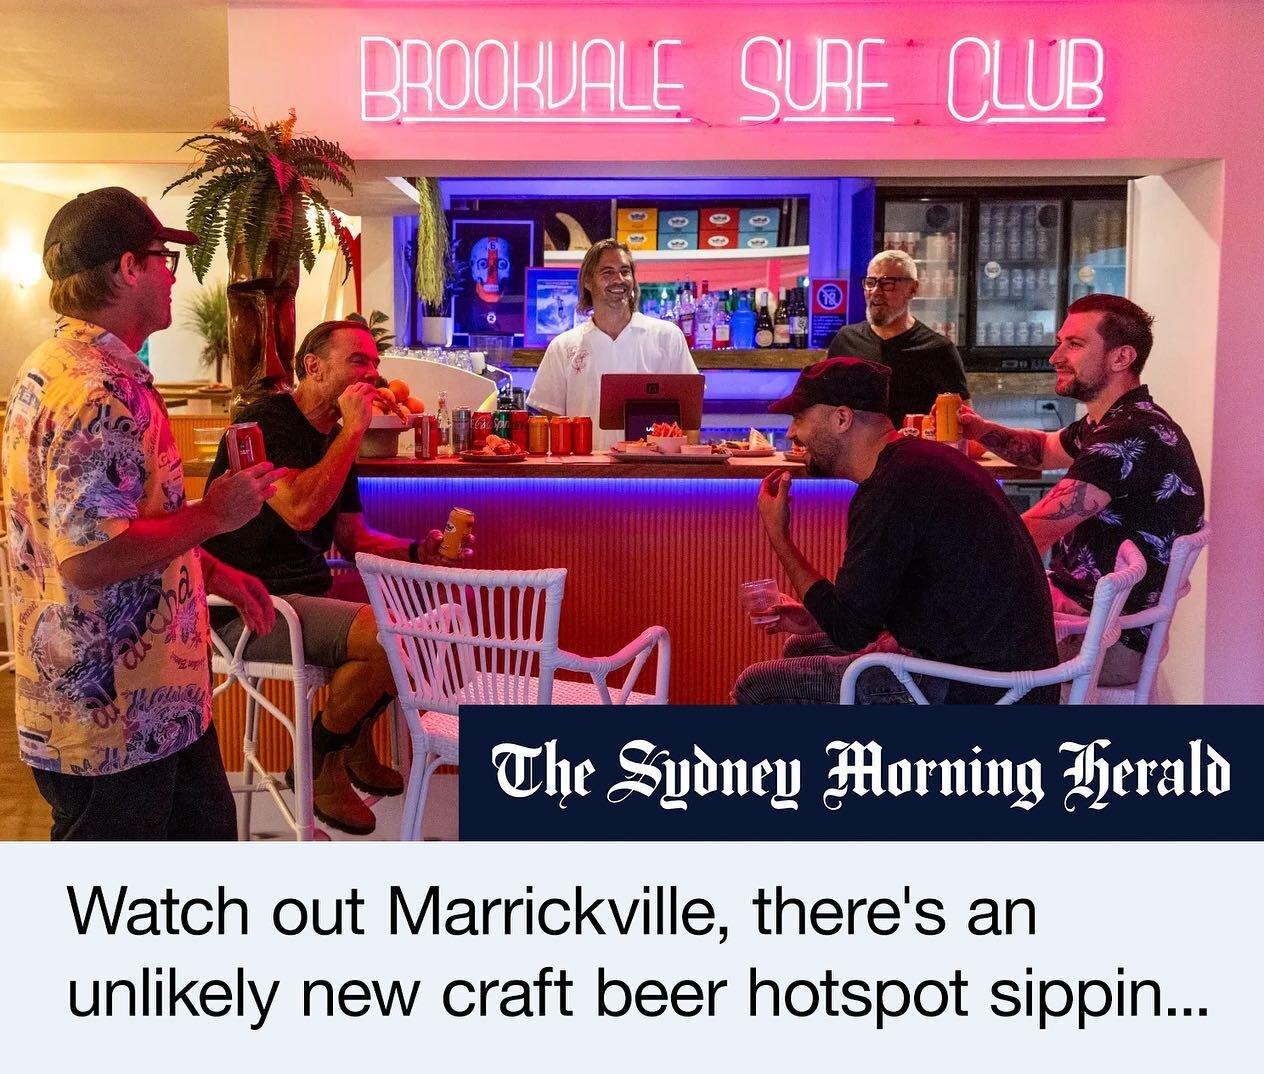 Brookvale's transformation was in the spotlight again last week, as highlighted by the Sydney Morning Herald article about its award-wining breweries and distilleries as well as its bourgeoning arts, culture and entertainment scene 

This is a key pi